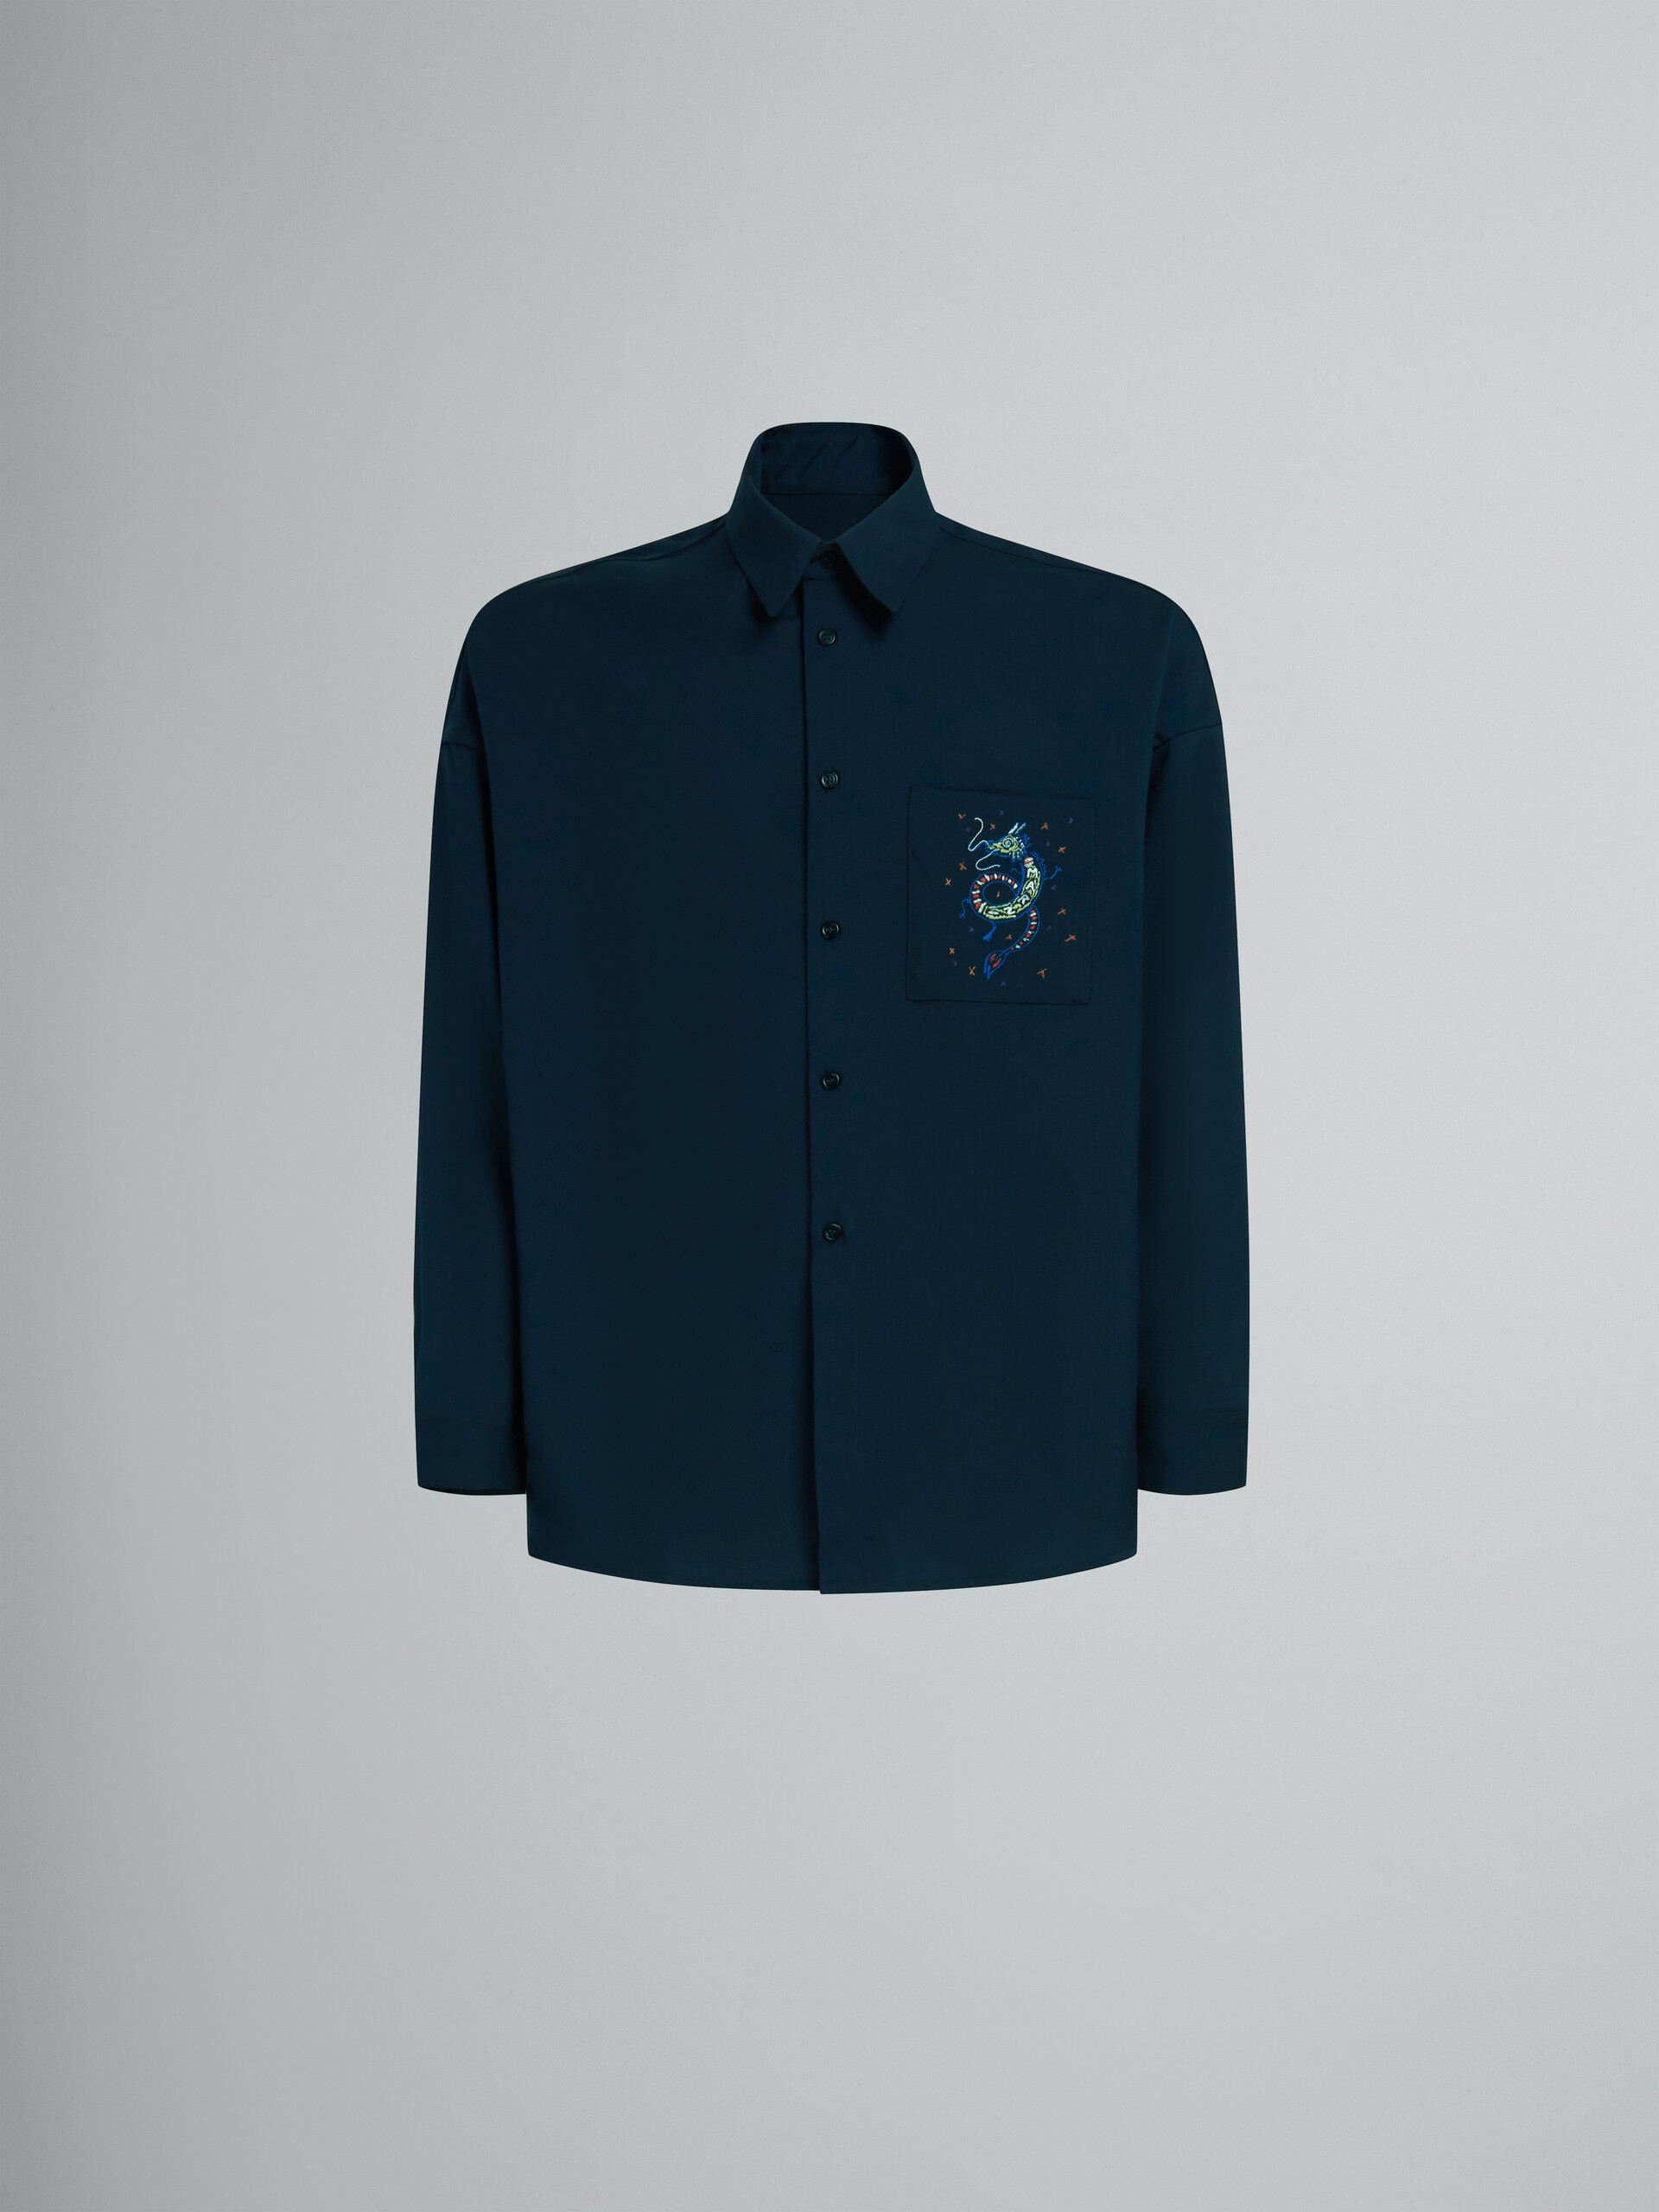 Deep blue wool shirt with embroidered dragon - Shirts - Image 1